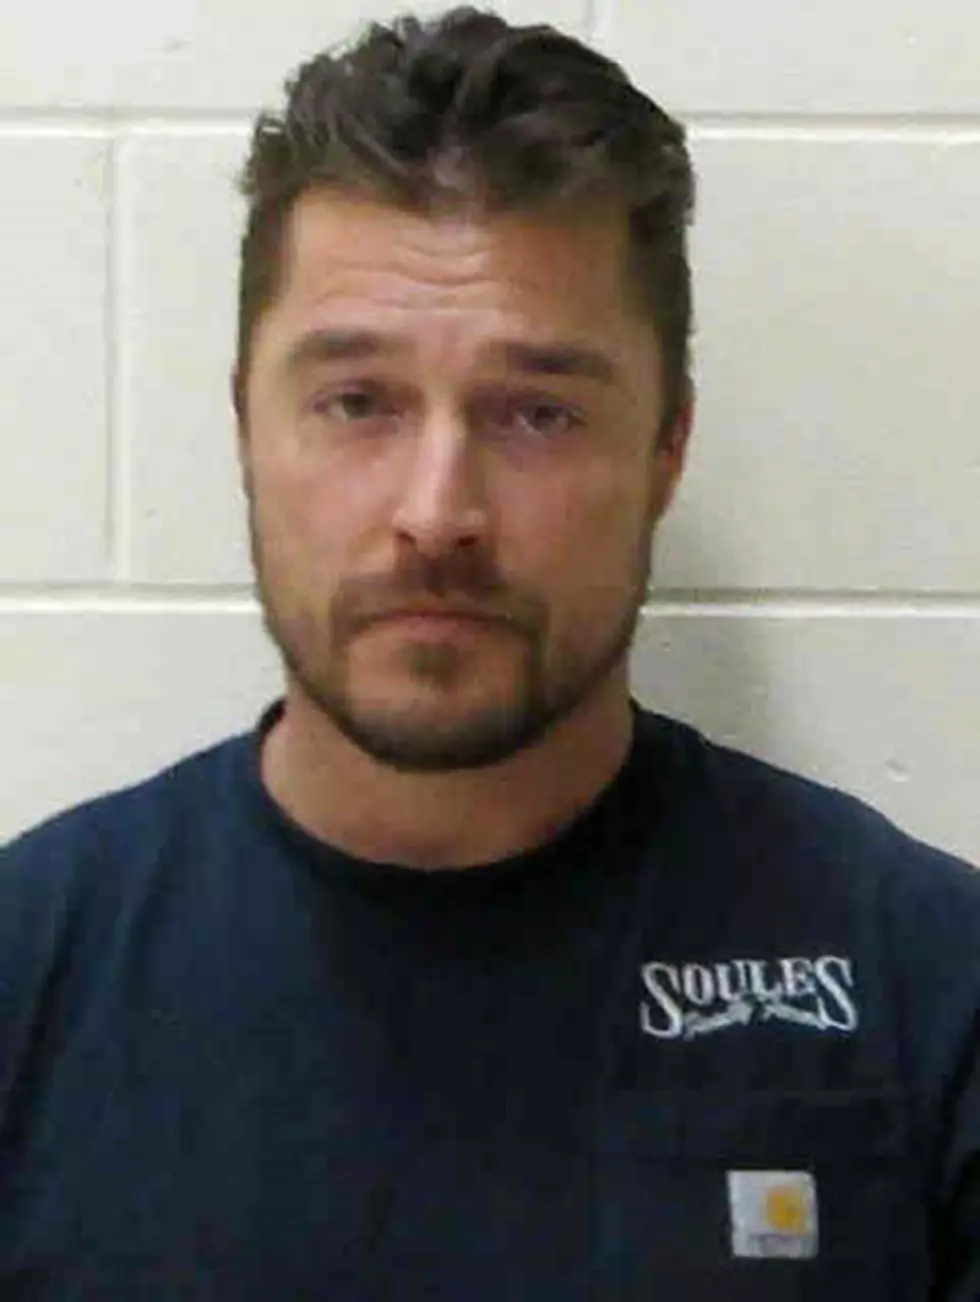 Chris Soules 911 Call Released by TMZ